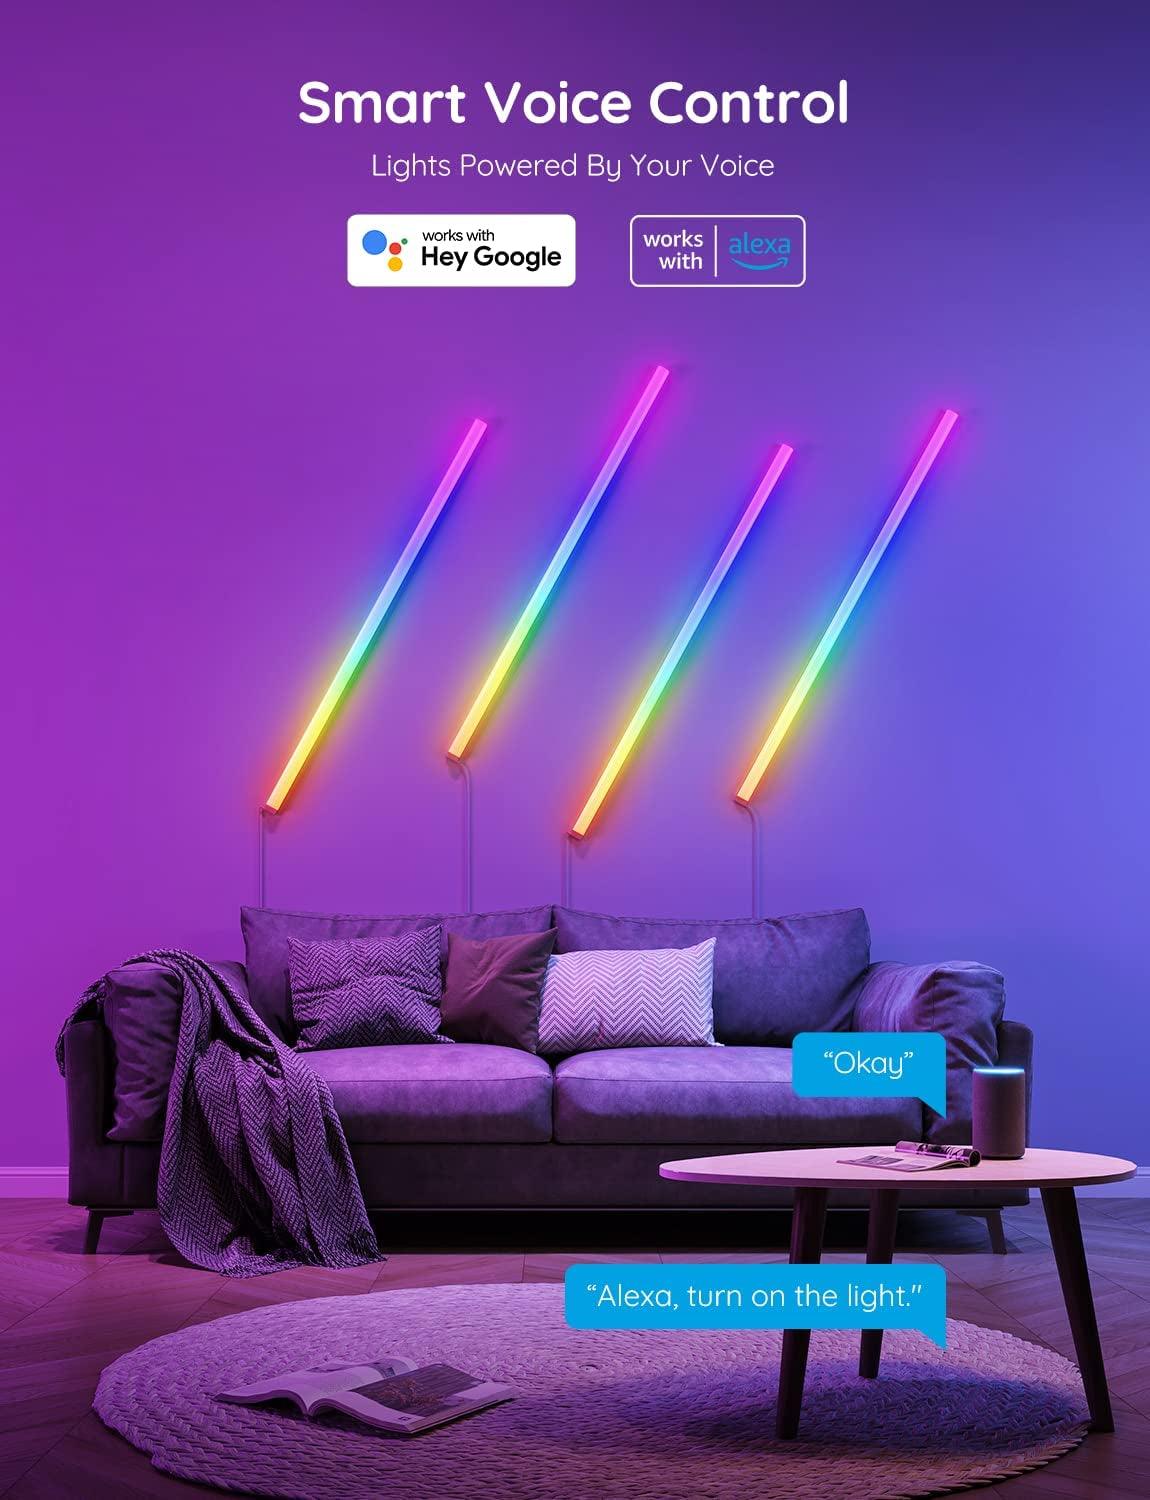 Govee Glide LED Wall Lights, RGBIC Wall Lights, Works with Alexa and Google Assistant, Smart Glide Lively Light Bars for Gaming Room Christmas Decor and Streaming, Multicolor Glide Sconces, 6 Pcs